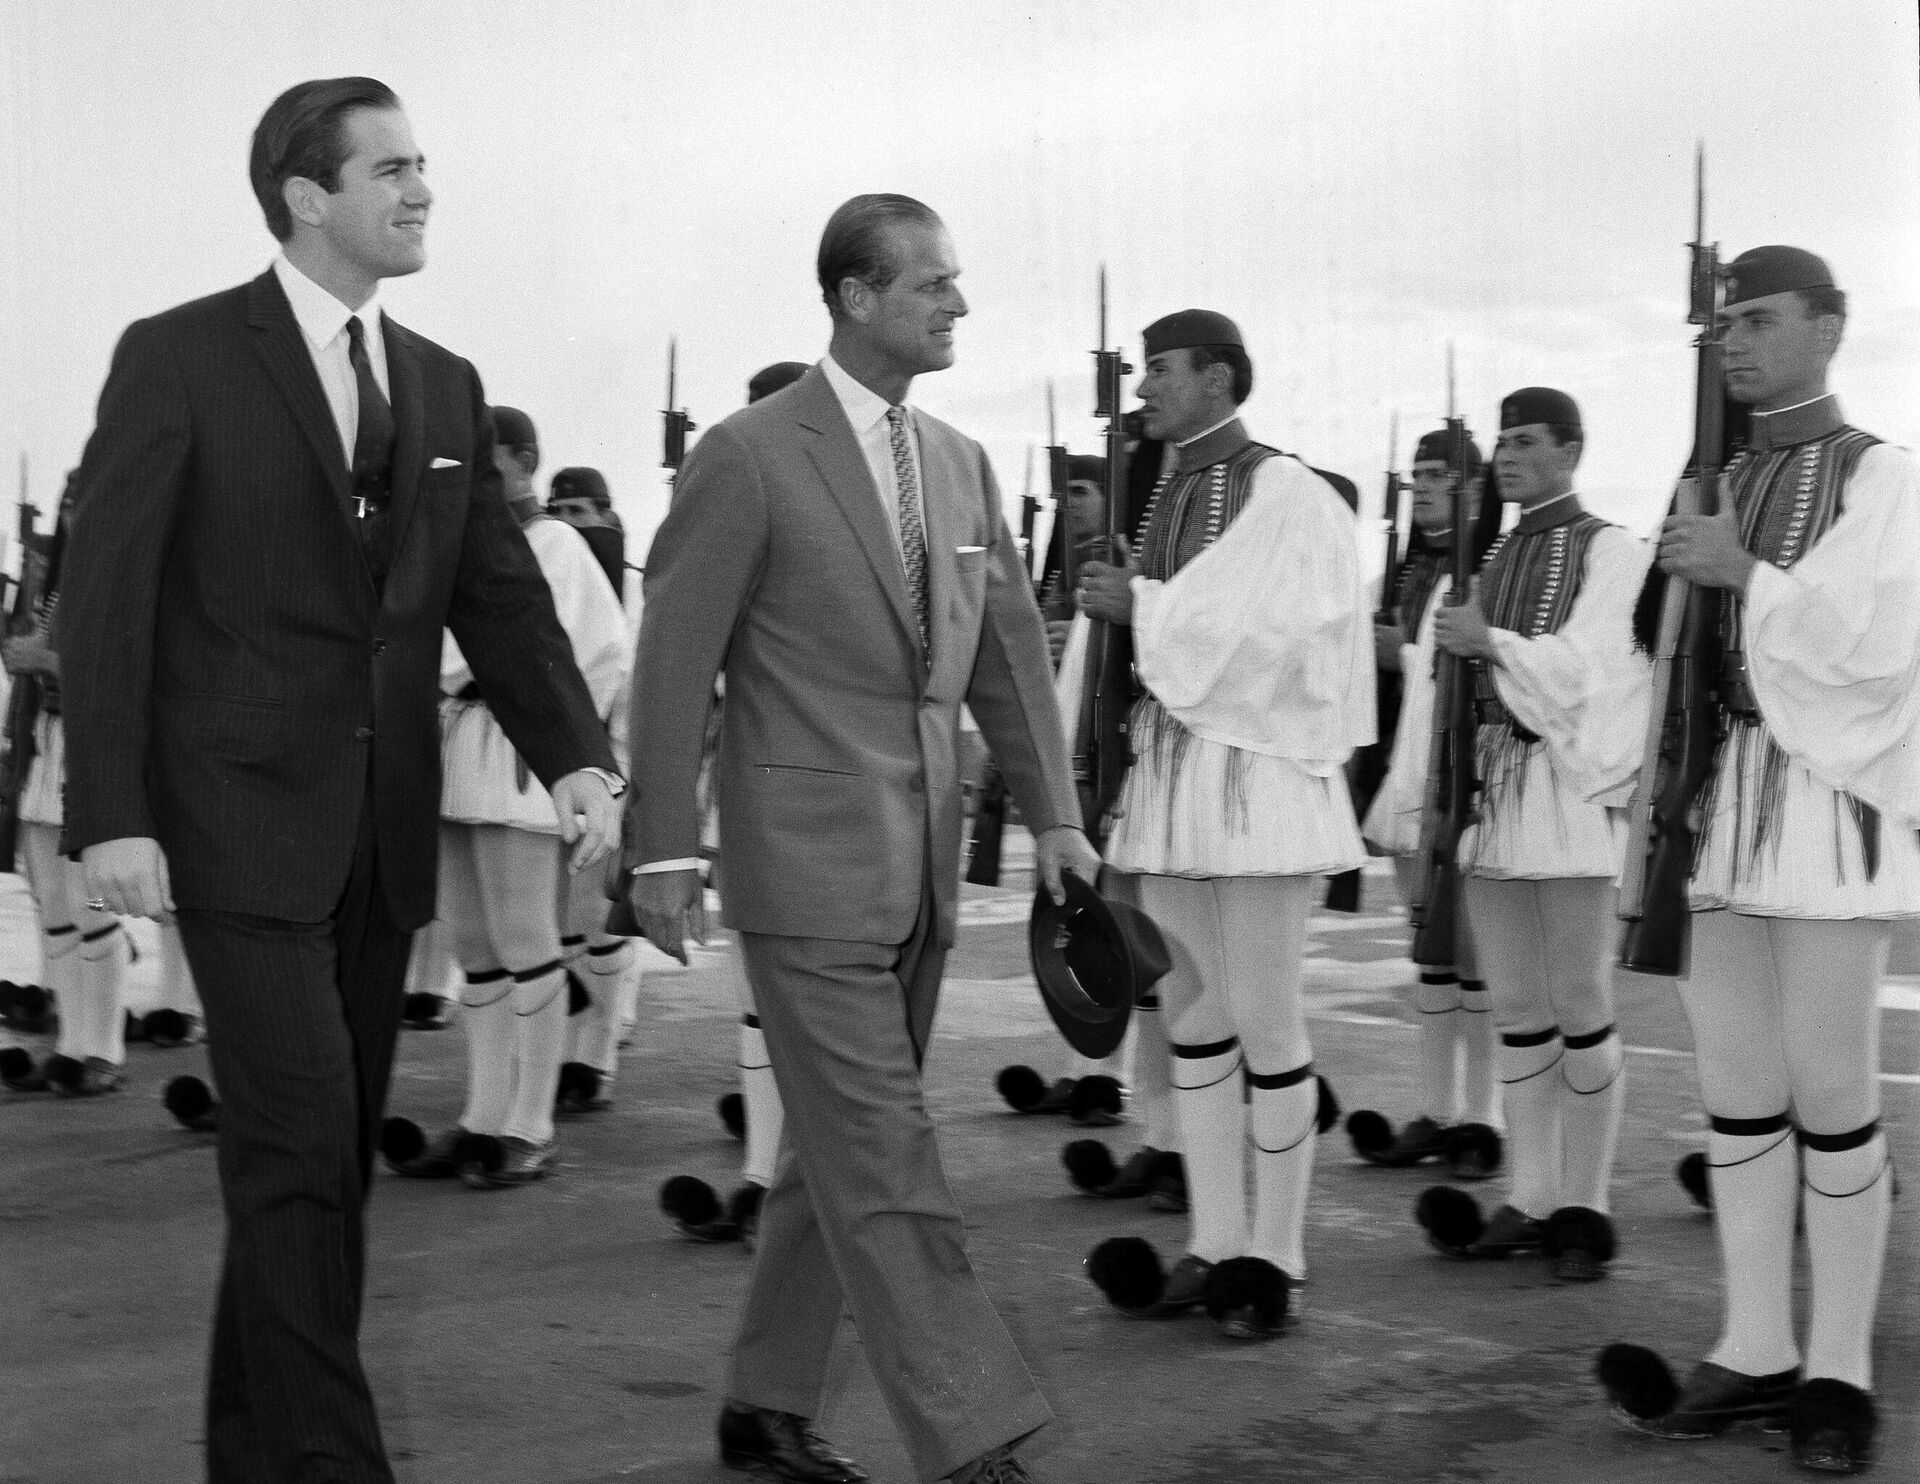 FILE - In this March 25, 1965 file photo, King Constantine II of Greece, left, and Prince Philip of Britain review an honor guard of the Greek Royal Evzones Guard as the prince arrives at the Athens Airport for a brief visit as the guest of the Greek royal family. Prince Philip's life spanned just under an entire century of European history. His genealogy was just as broad, with Britain's longest-serving consort linked by blood and marriage to most of the continent's royal houses. - Sputnik International, 1920, 10.01.2023